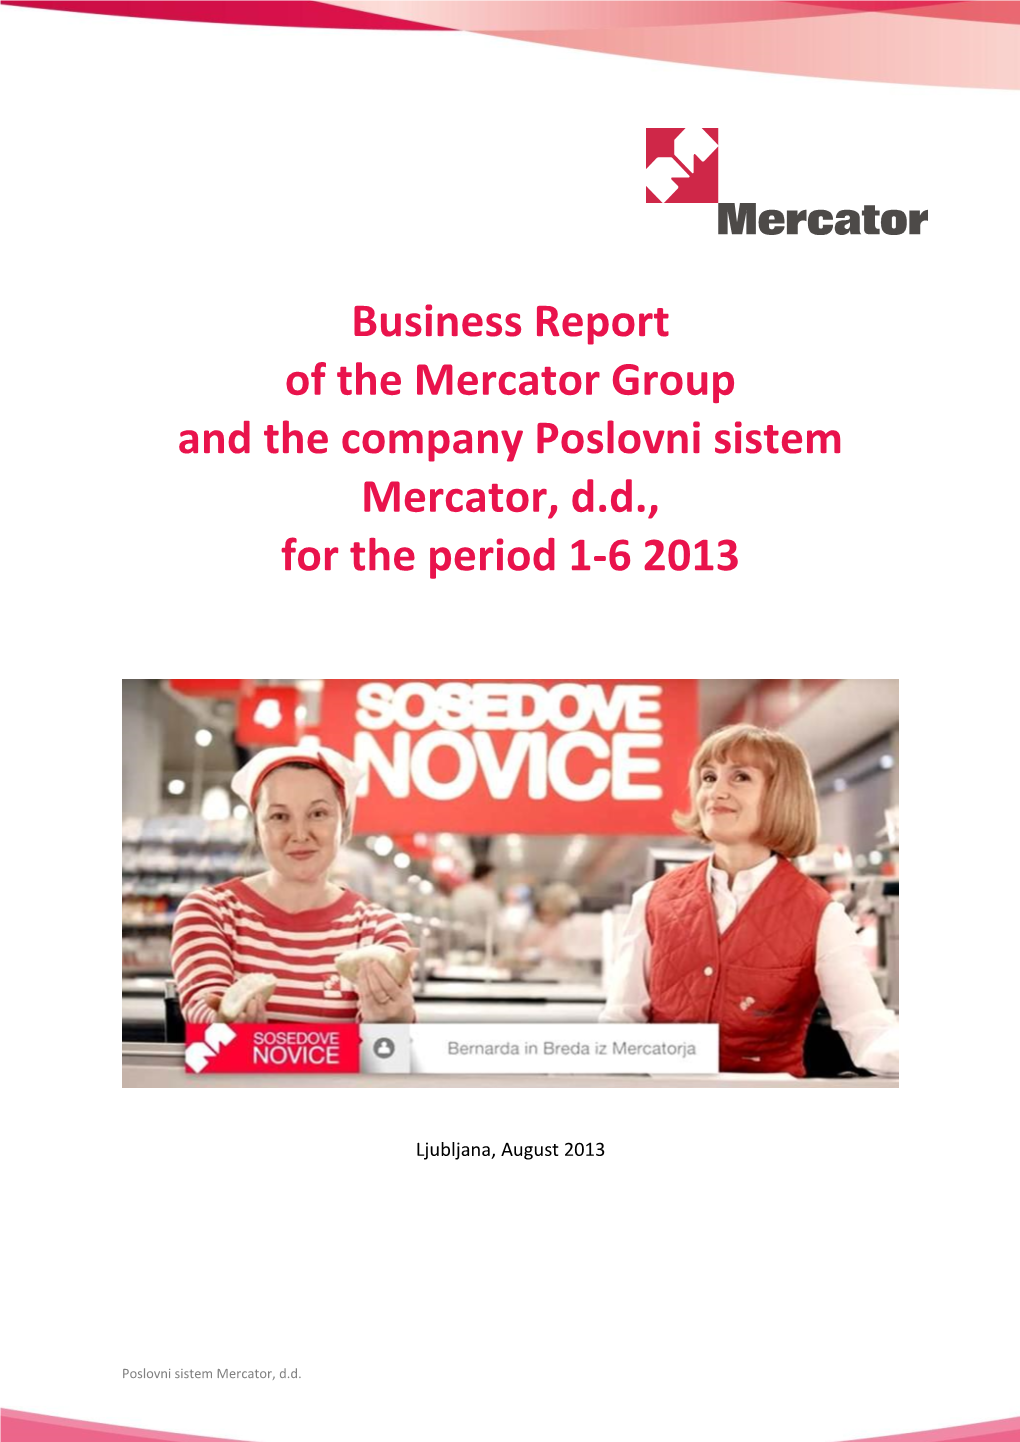 Business Report of the Mercator Group and the Company Poslovni Sistem Mercator, D.D., for the Period 1-6 2013